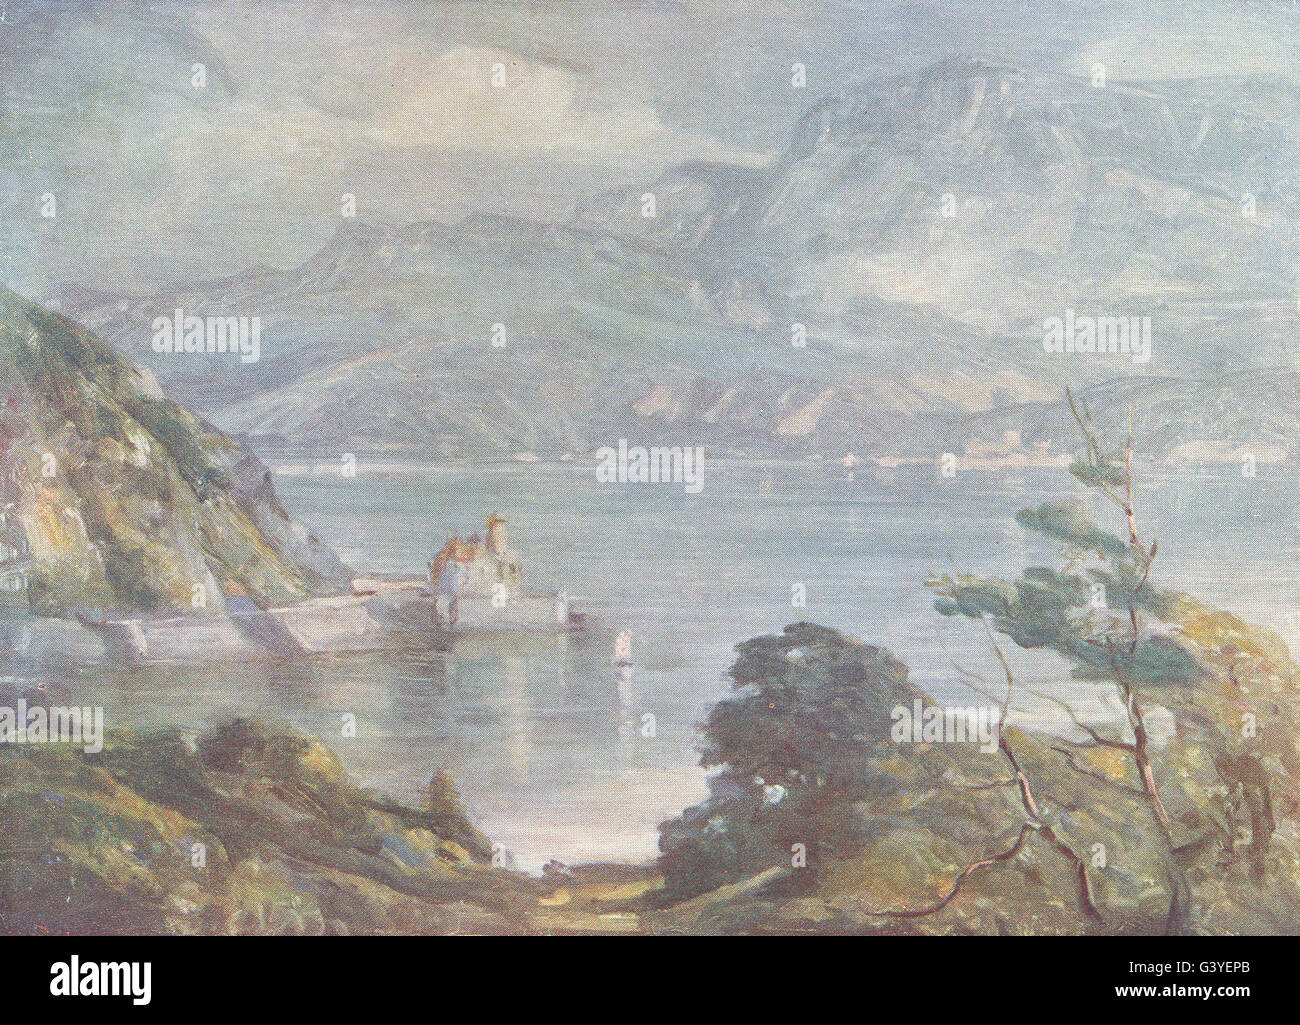 WALES: Misty Morning, near Barmouth, antique print 1905 Stock Photo